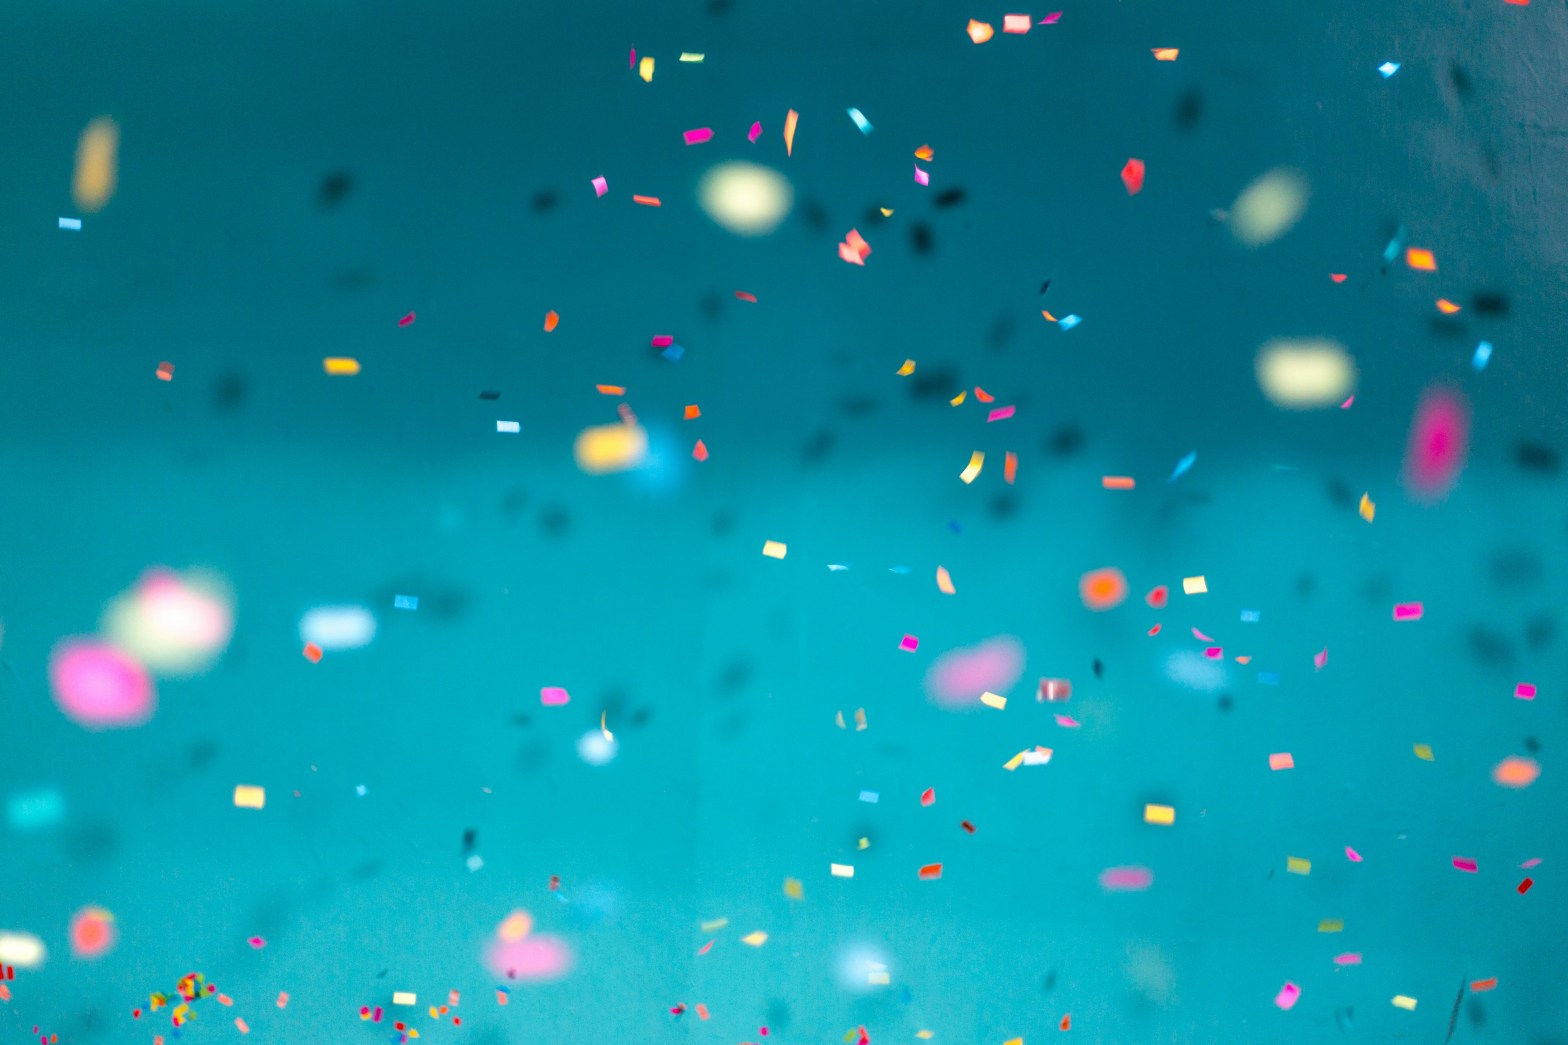 Confetti falling in front of a teal background